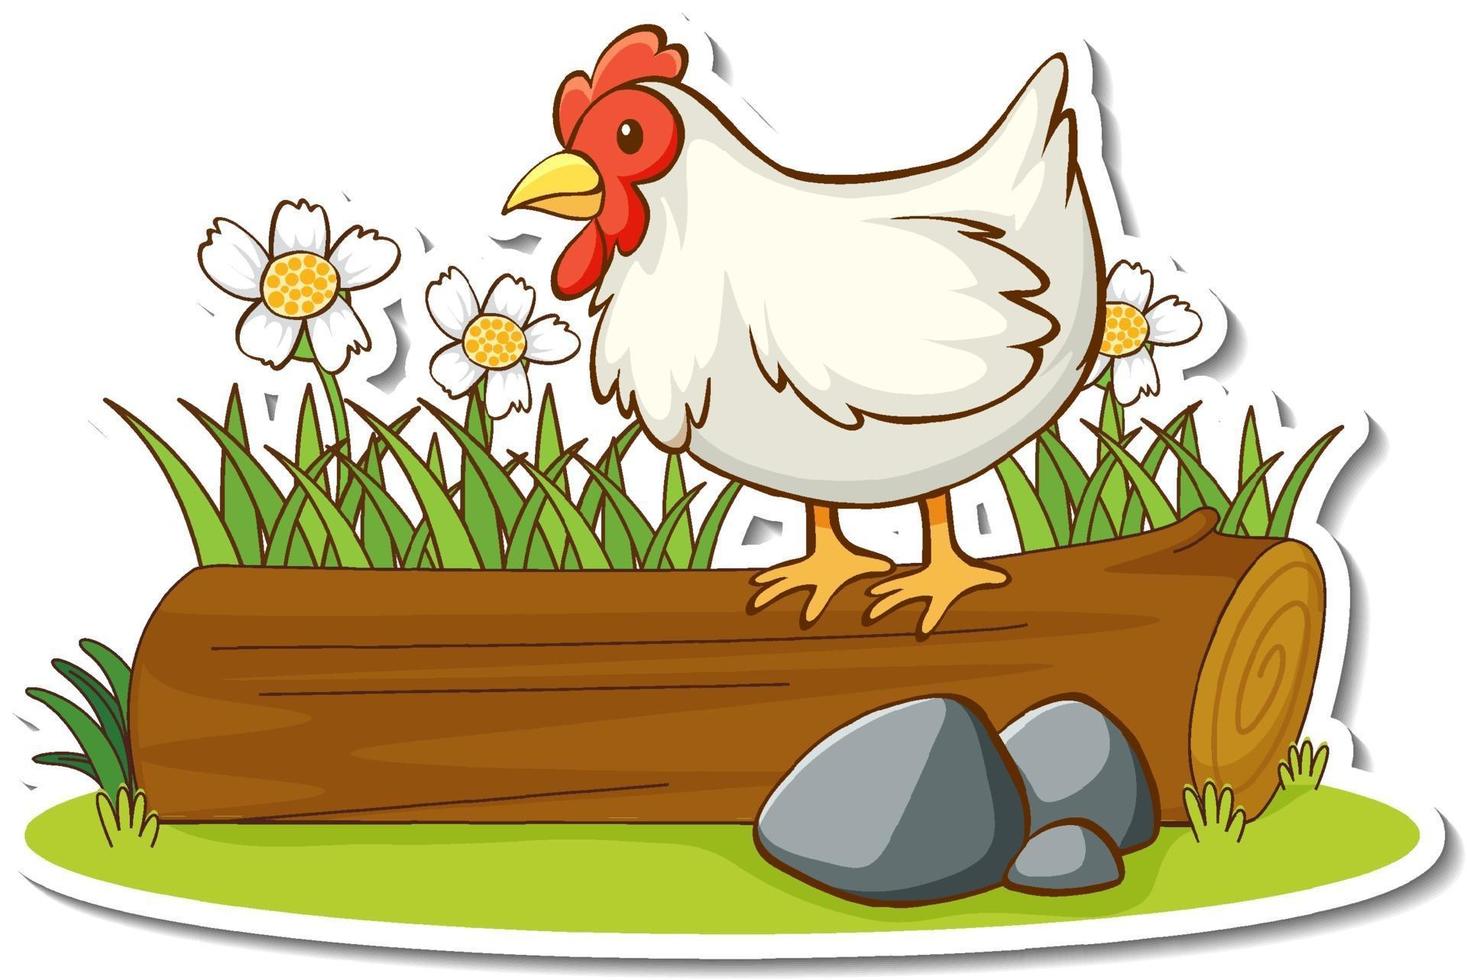 Chicken standing on log with nature element sticker vector